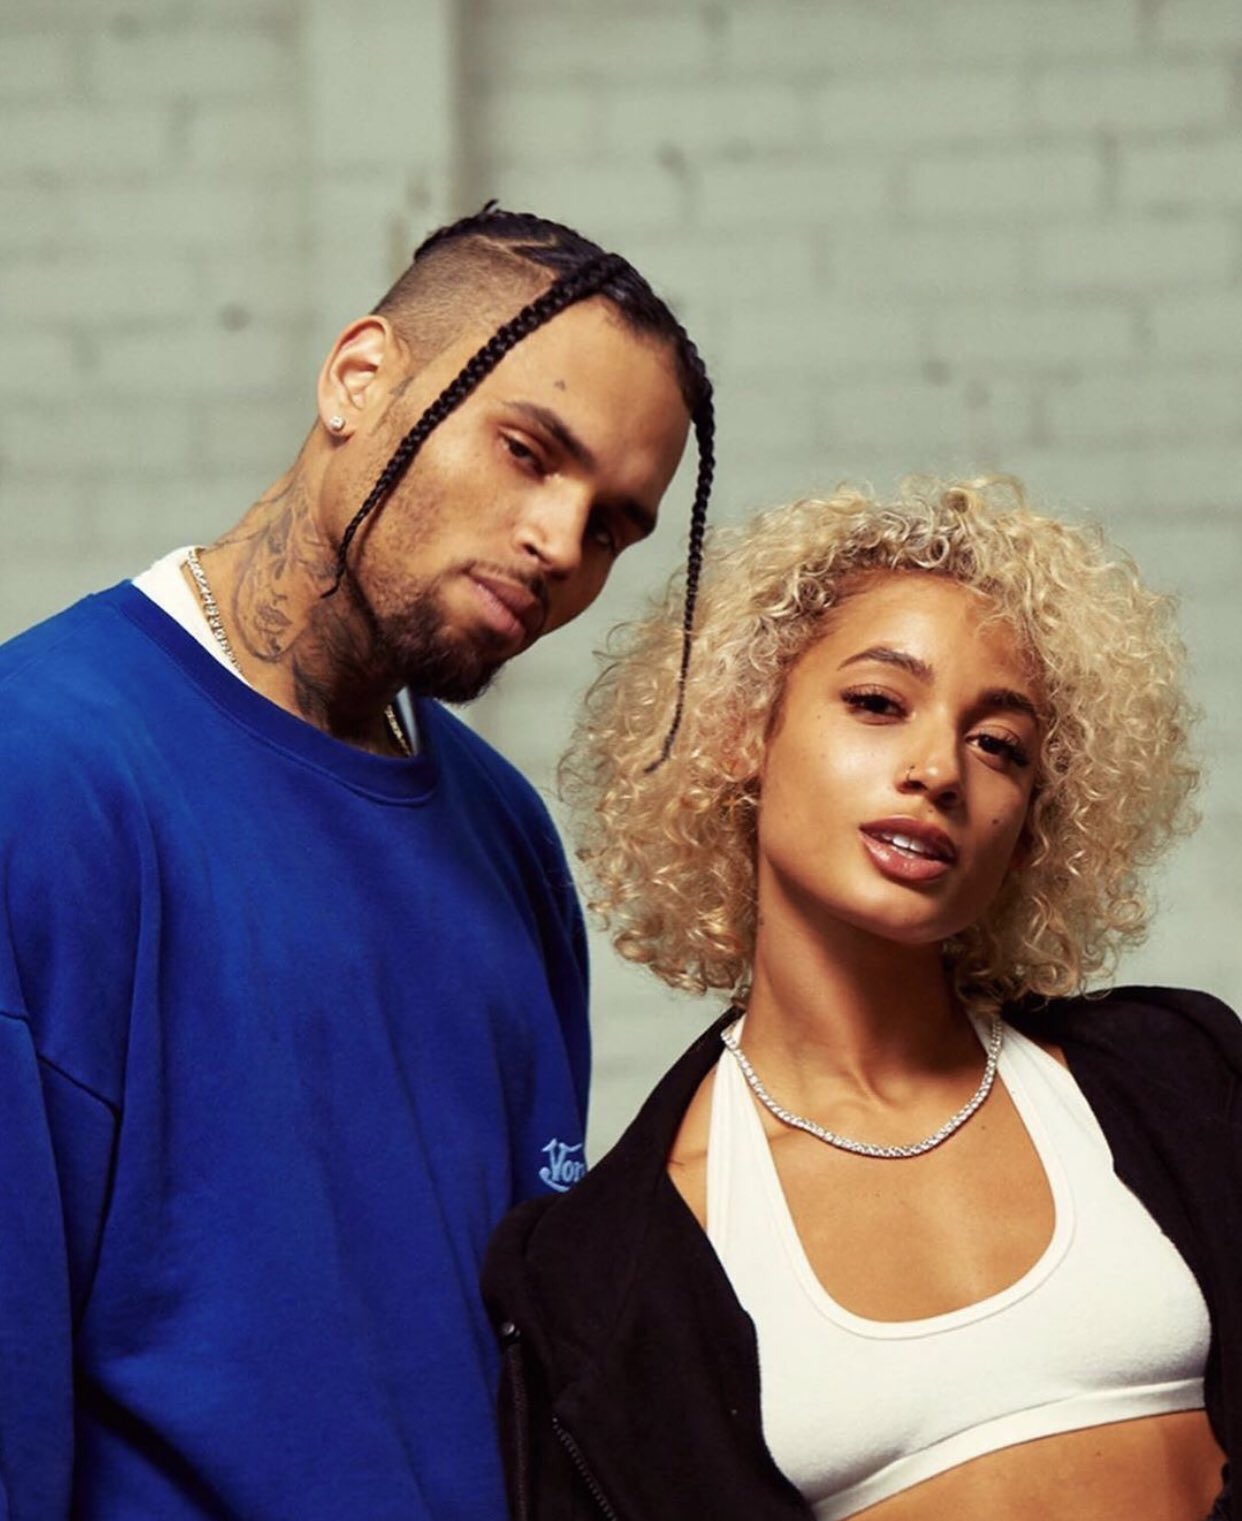 Chris Brown News On Twitter Video Premier Danileigh S Music Video For Easy Ft Chris Brown Out Now Https T Co Gmvqmpksi1